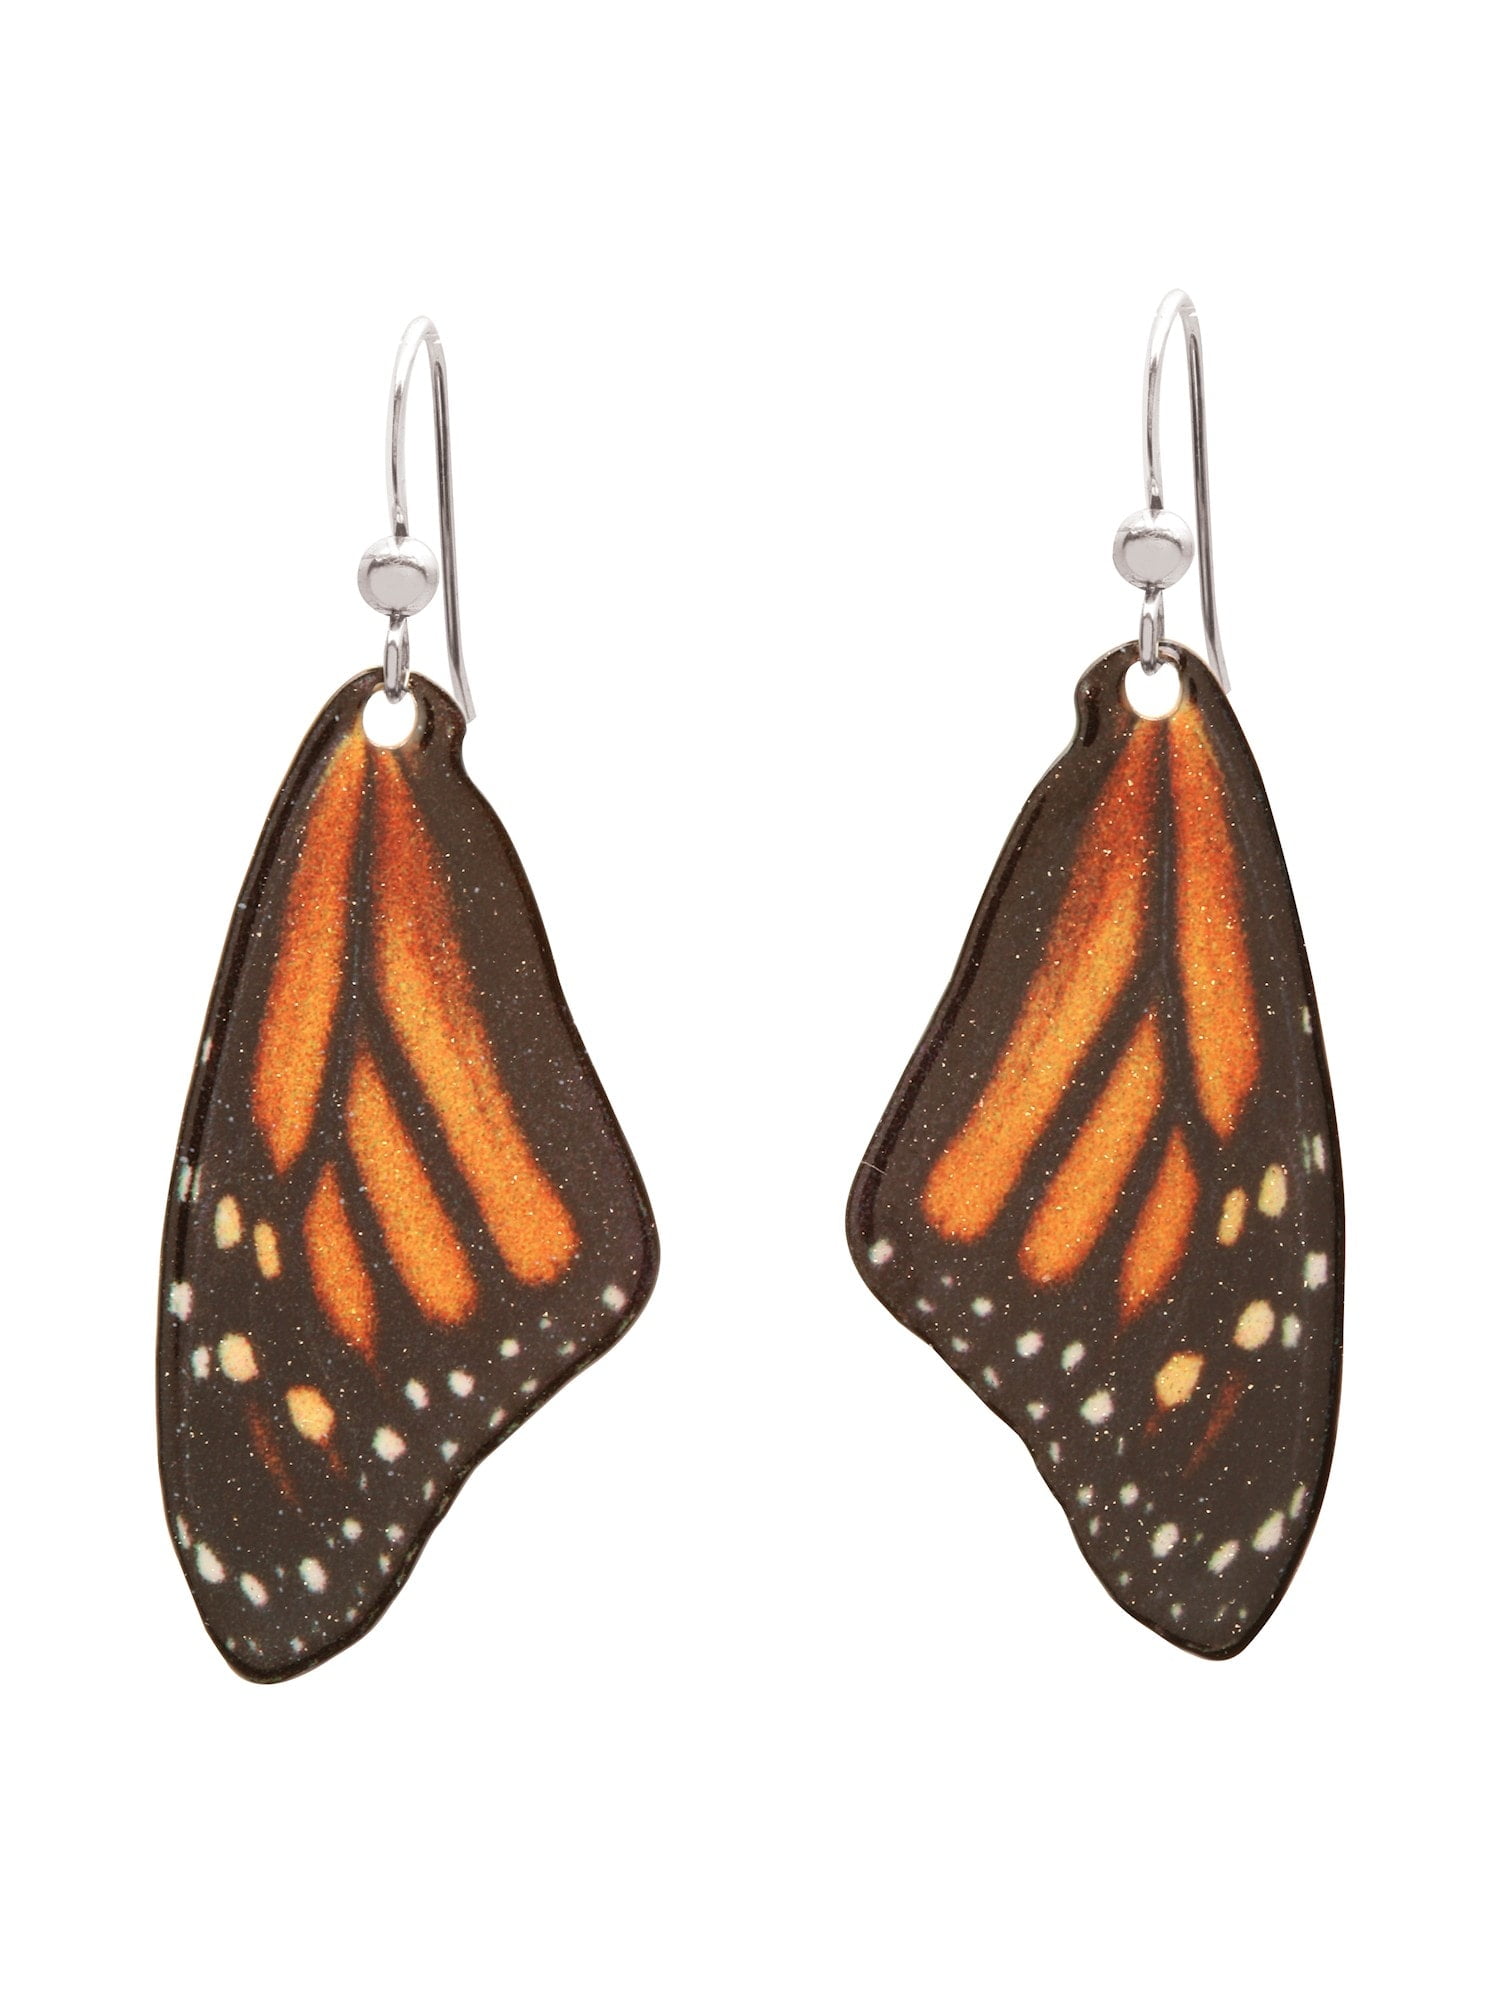 Real Painted Butterfly Wing Drop Dangle Earrings Resin Coated Handmade Jewelry